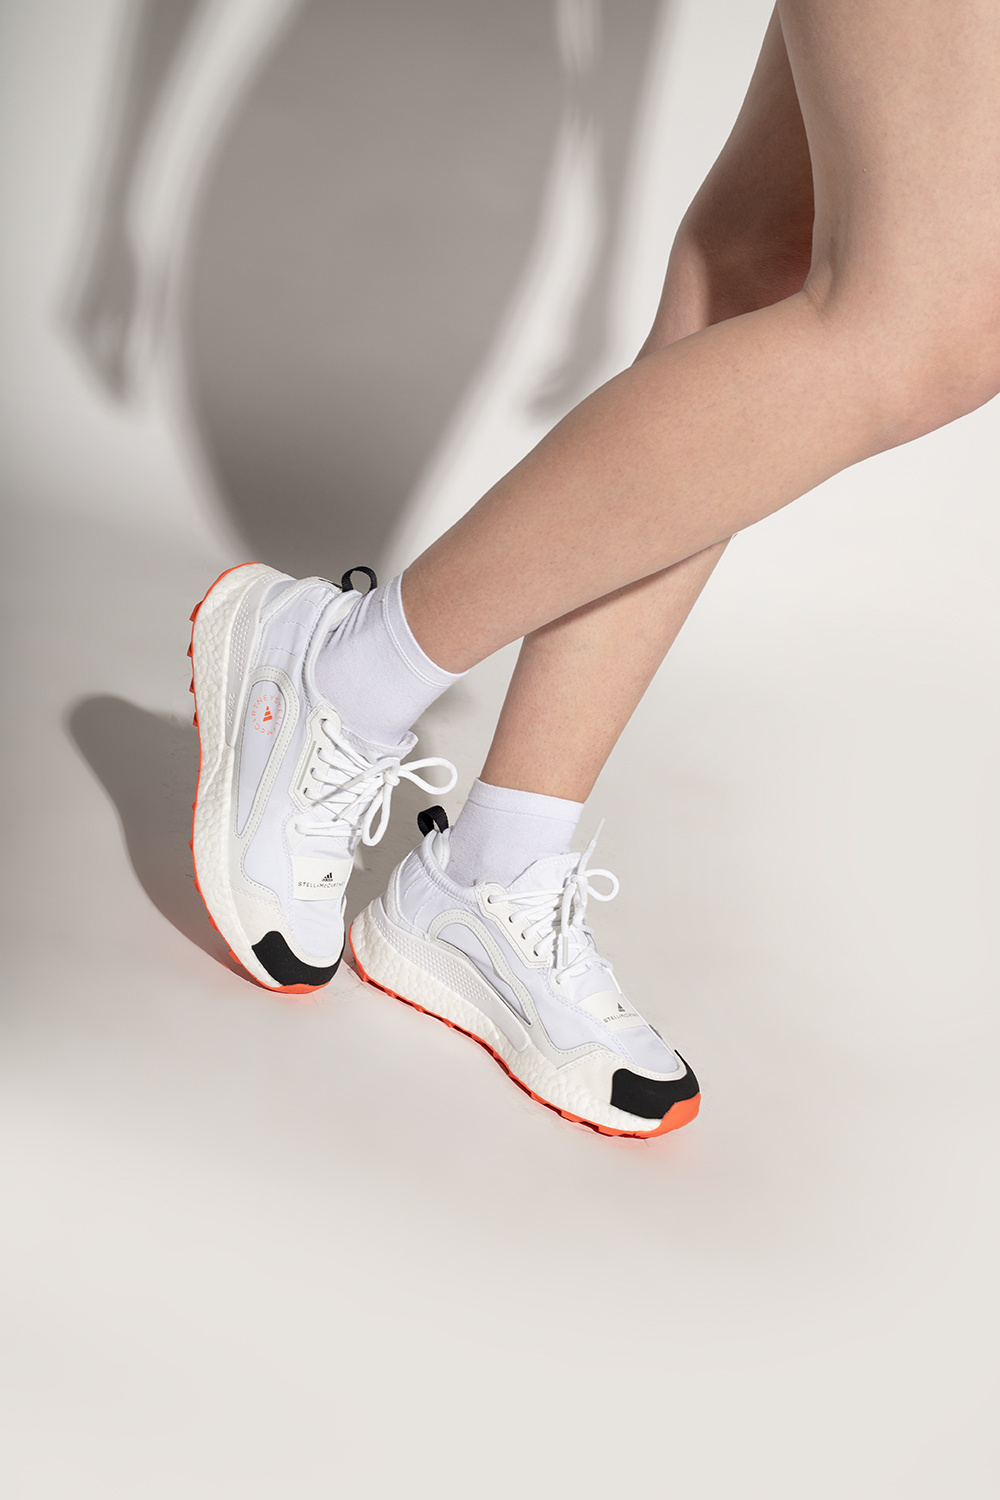 adidas By Stella McCartney Outdoorboost 2.0 Sneakers in White